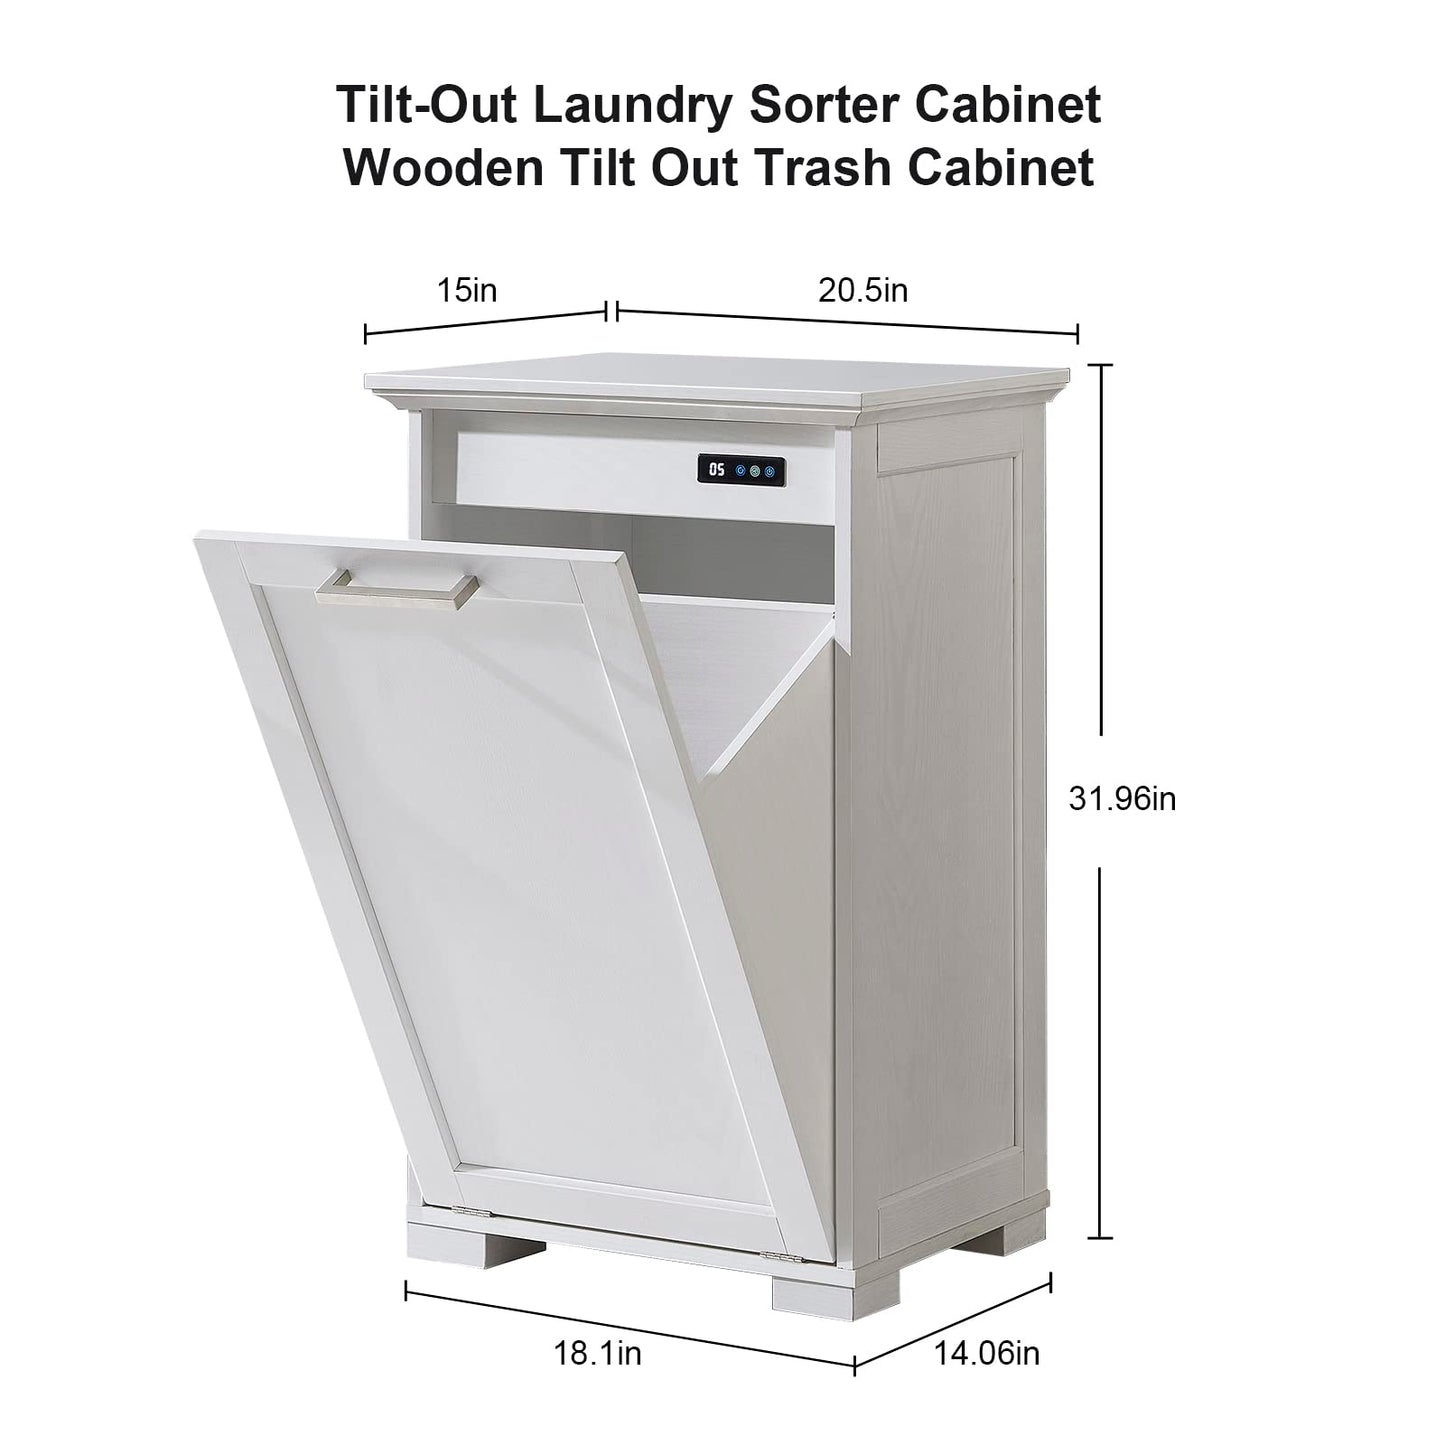 UpWiew Tilt Out Trash Cabinet Wooden, Single Door 10 Gallons, White Finish